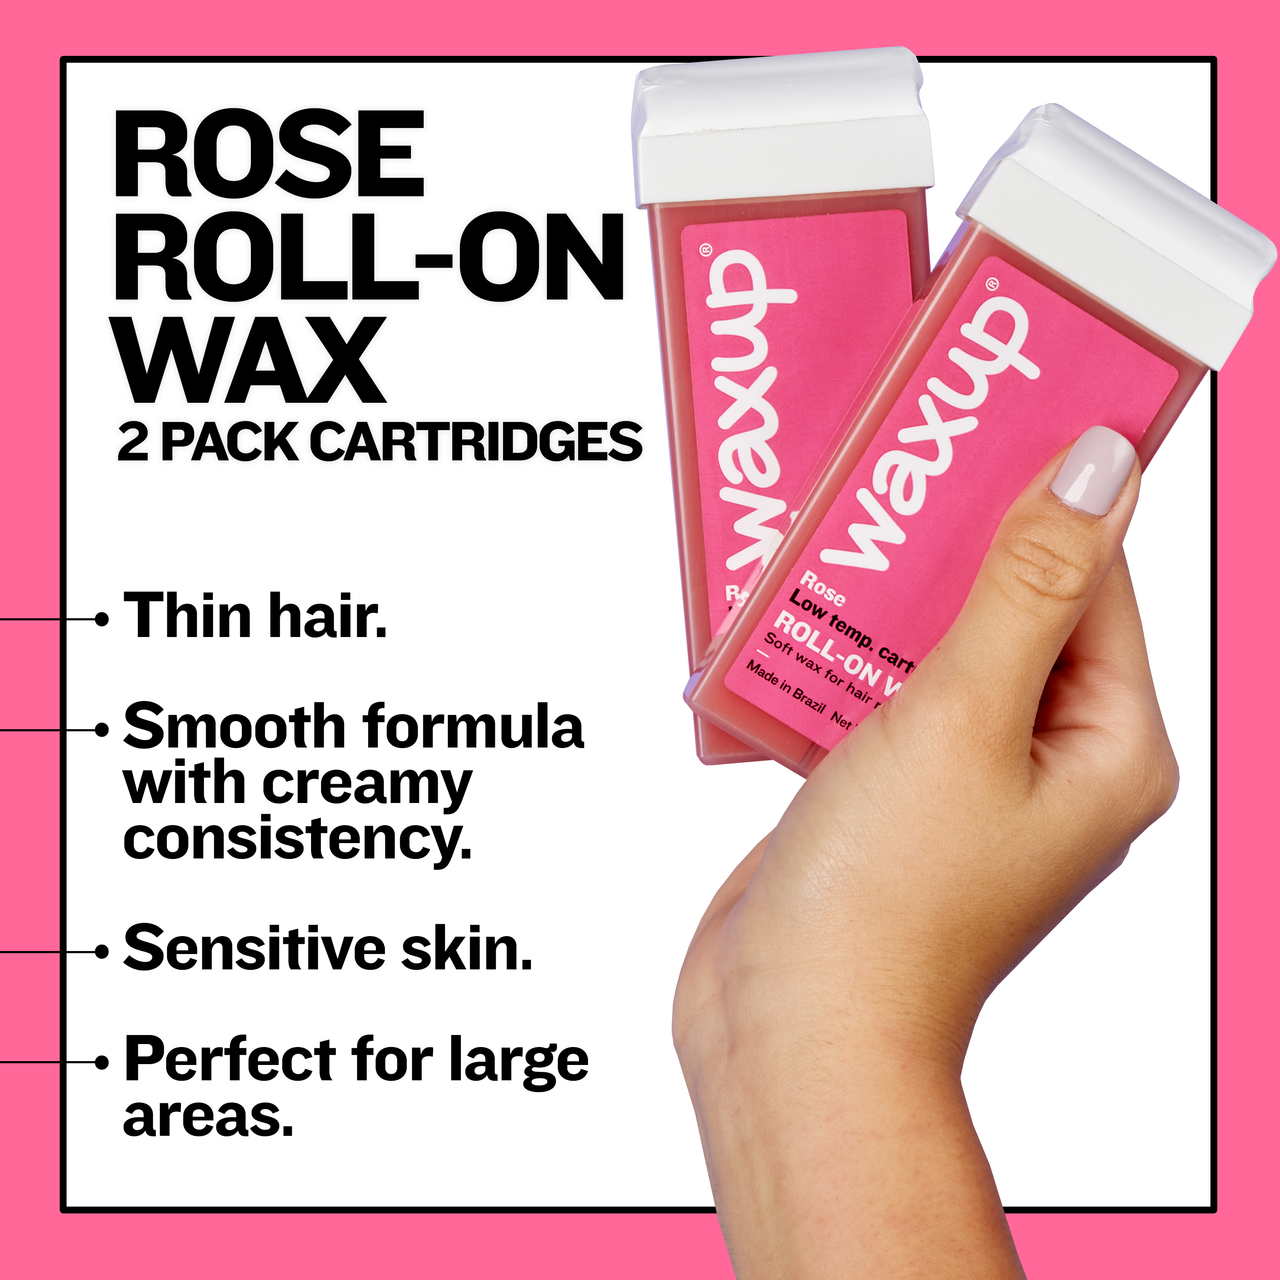 Rose Roll On Wax Cartridges 2 Pack - thatswaxup -  - Roll On Wax - waxup hair removal wax body waxing kit women and men professional waxing supplies